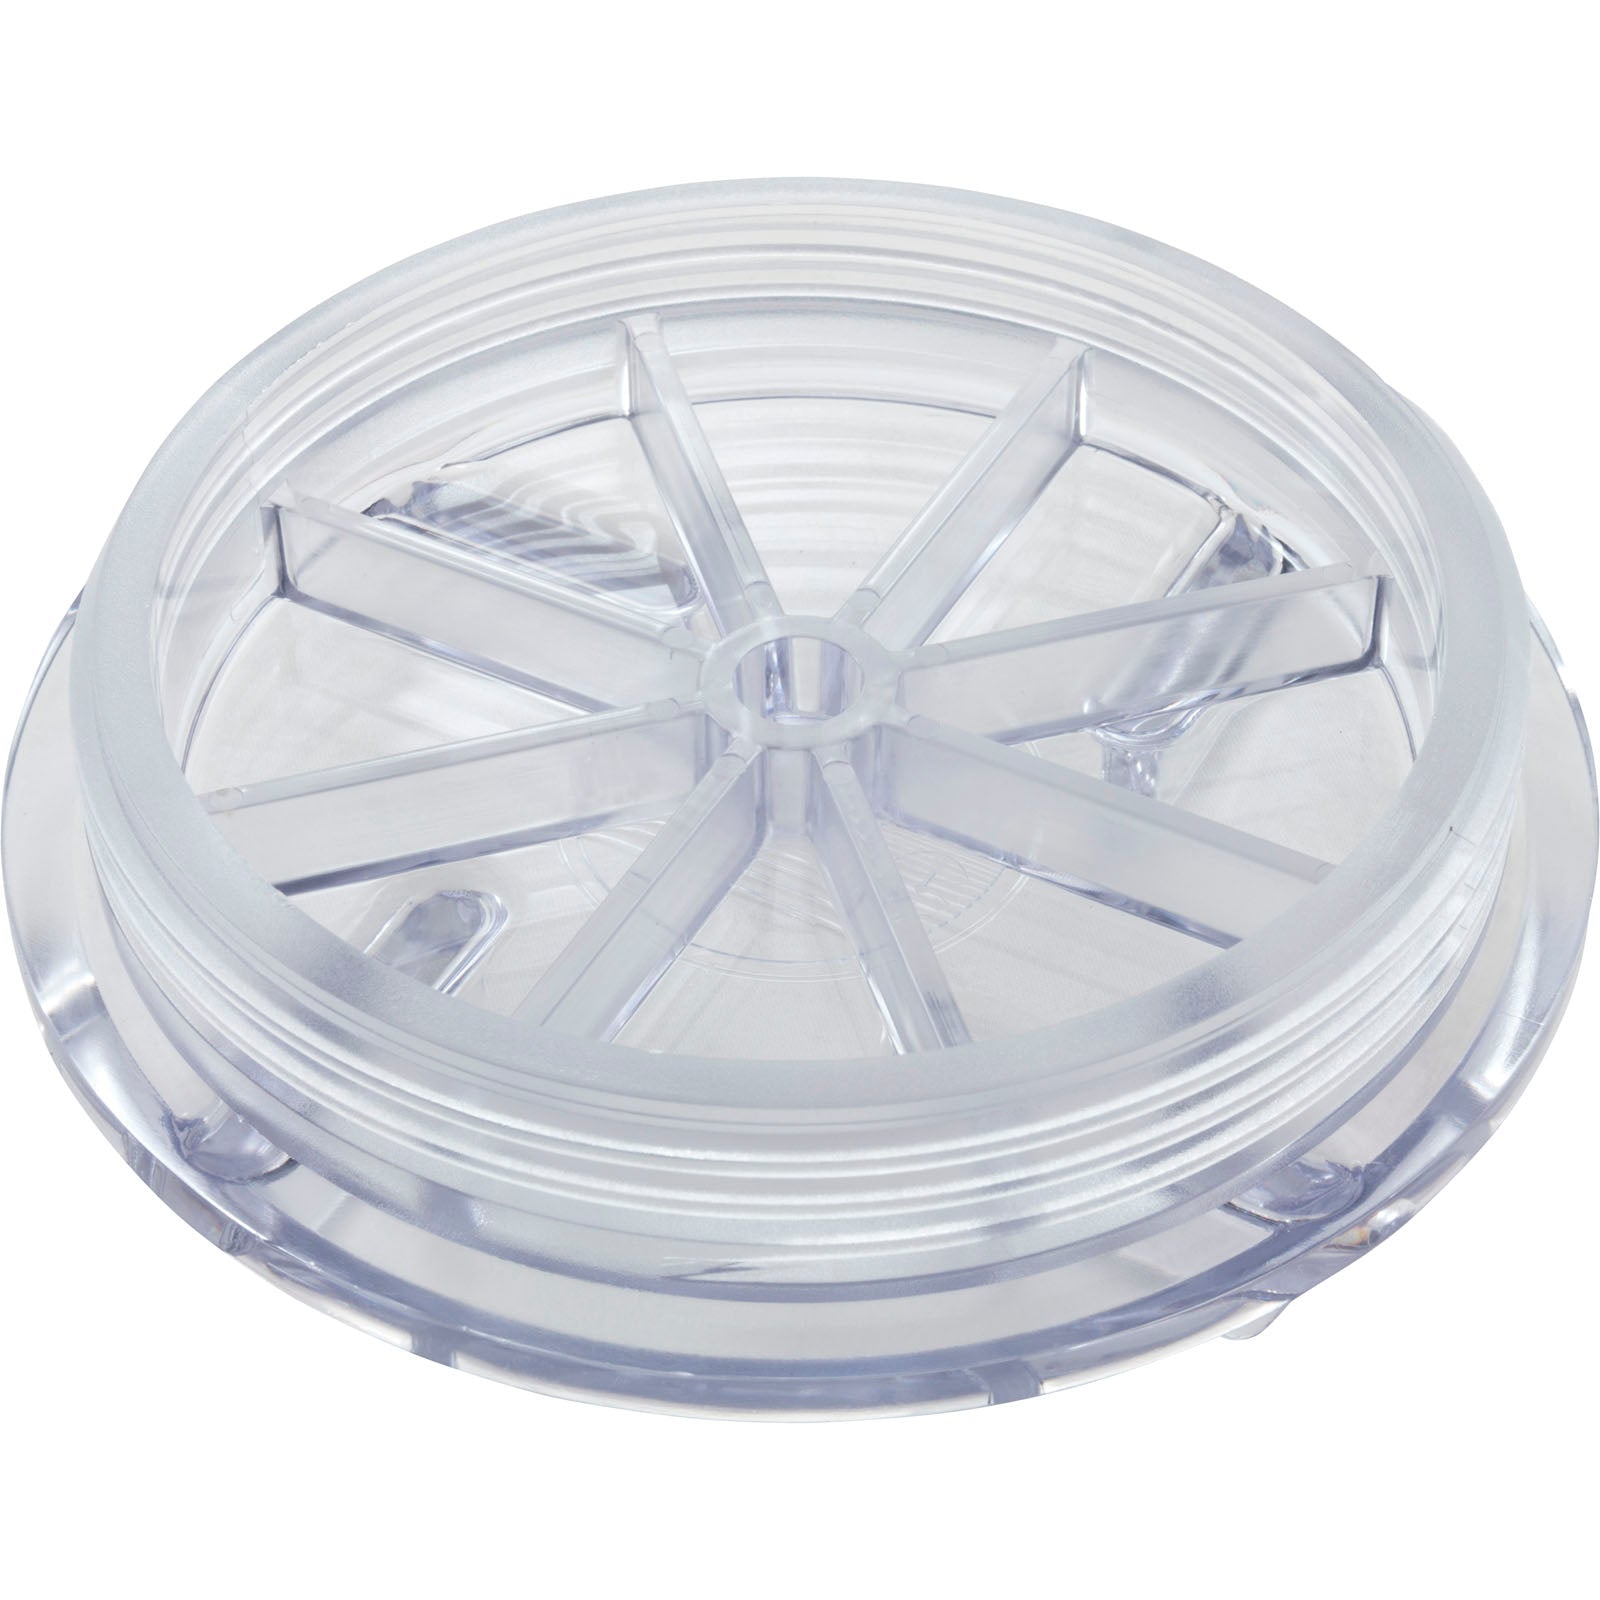 Trap Lid, Waterco SupaTuf/HydroStorm, 6-3/4", Without O-Ring/ 634000